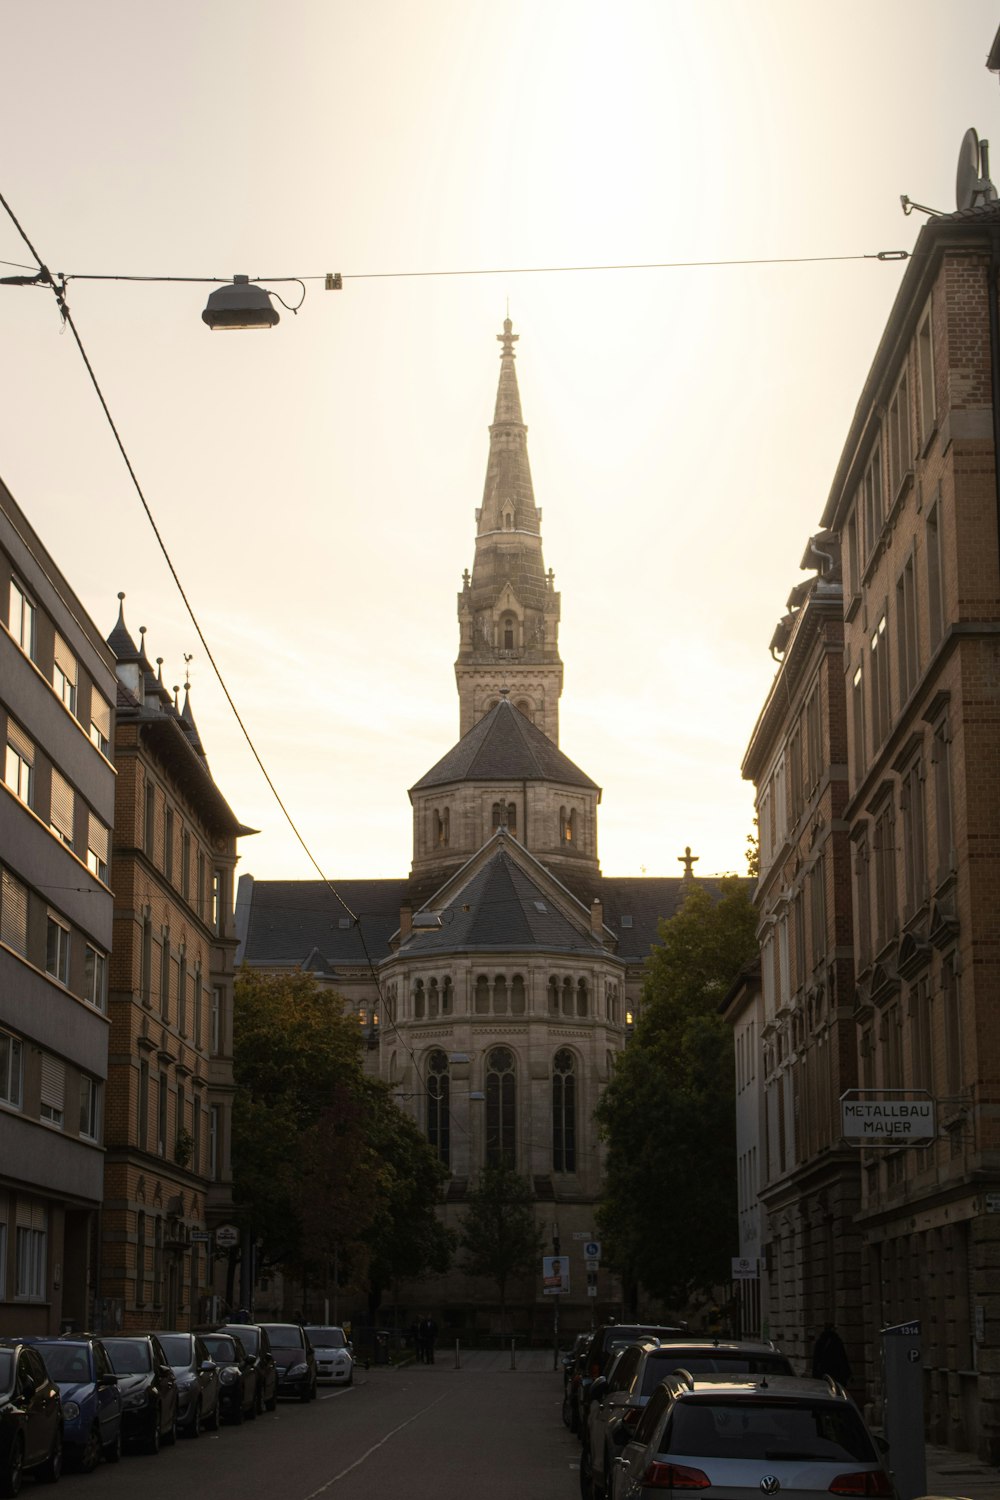 a city street with a church steeple in the background